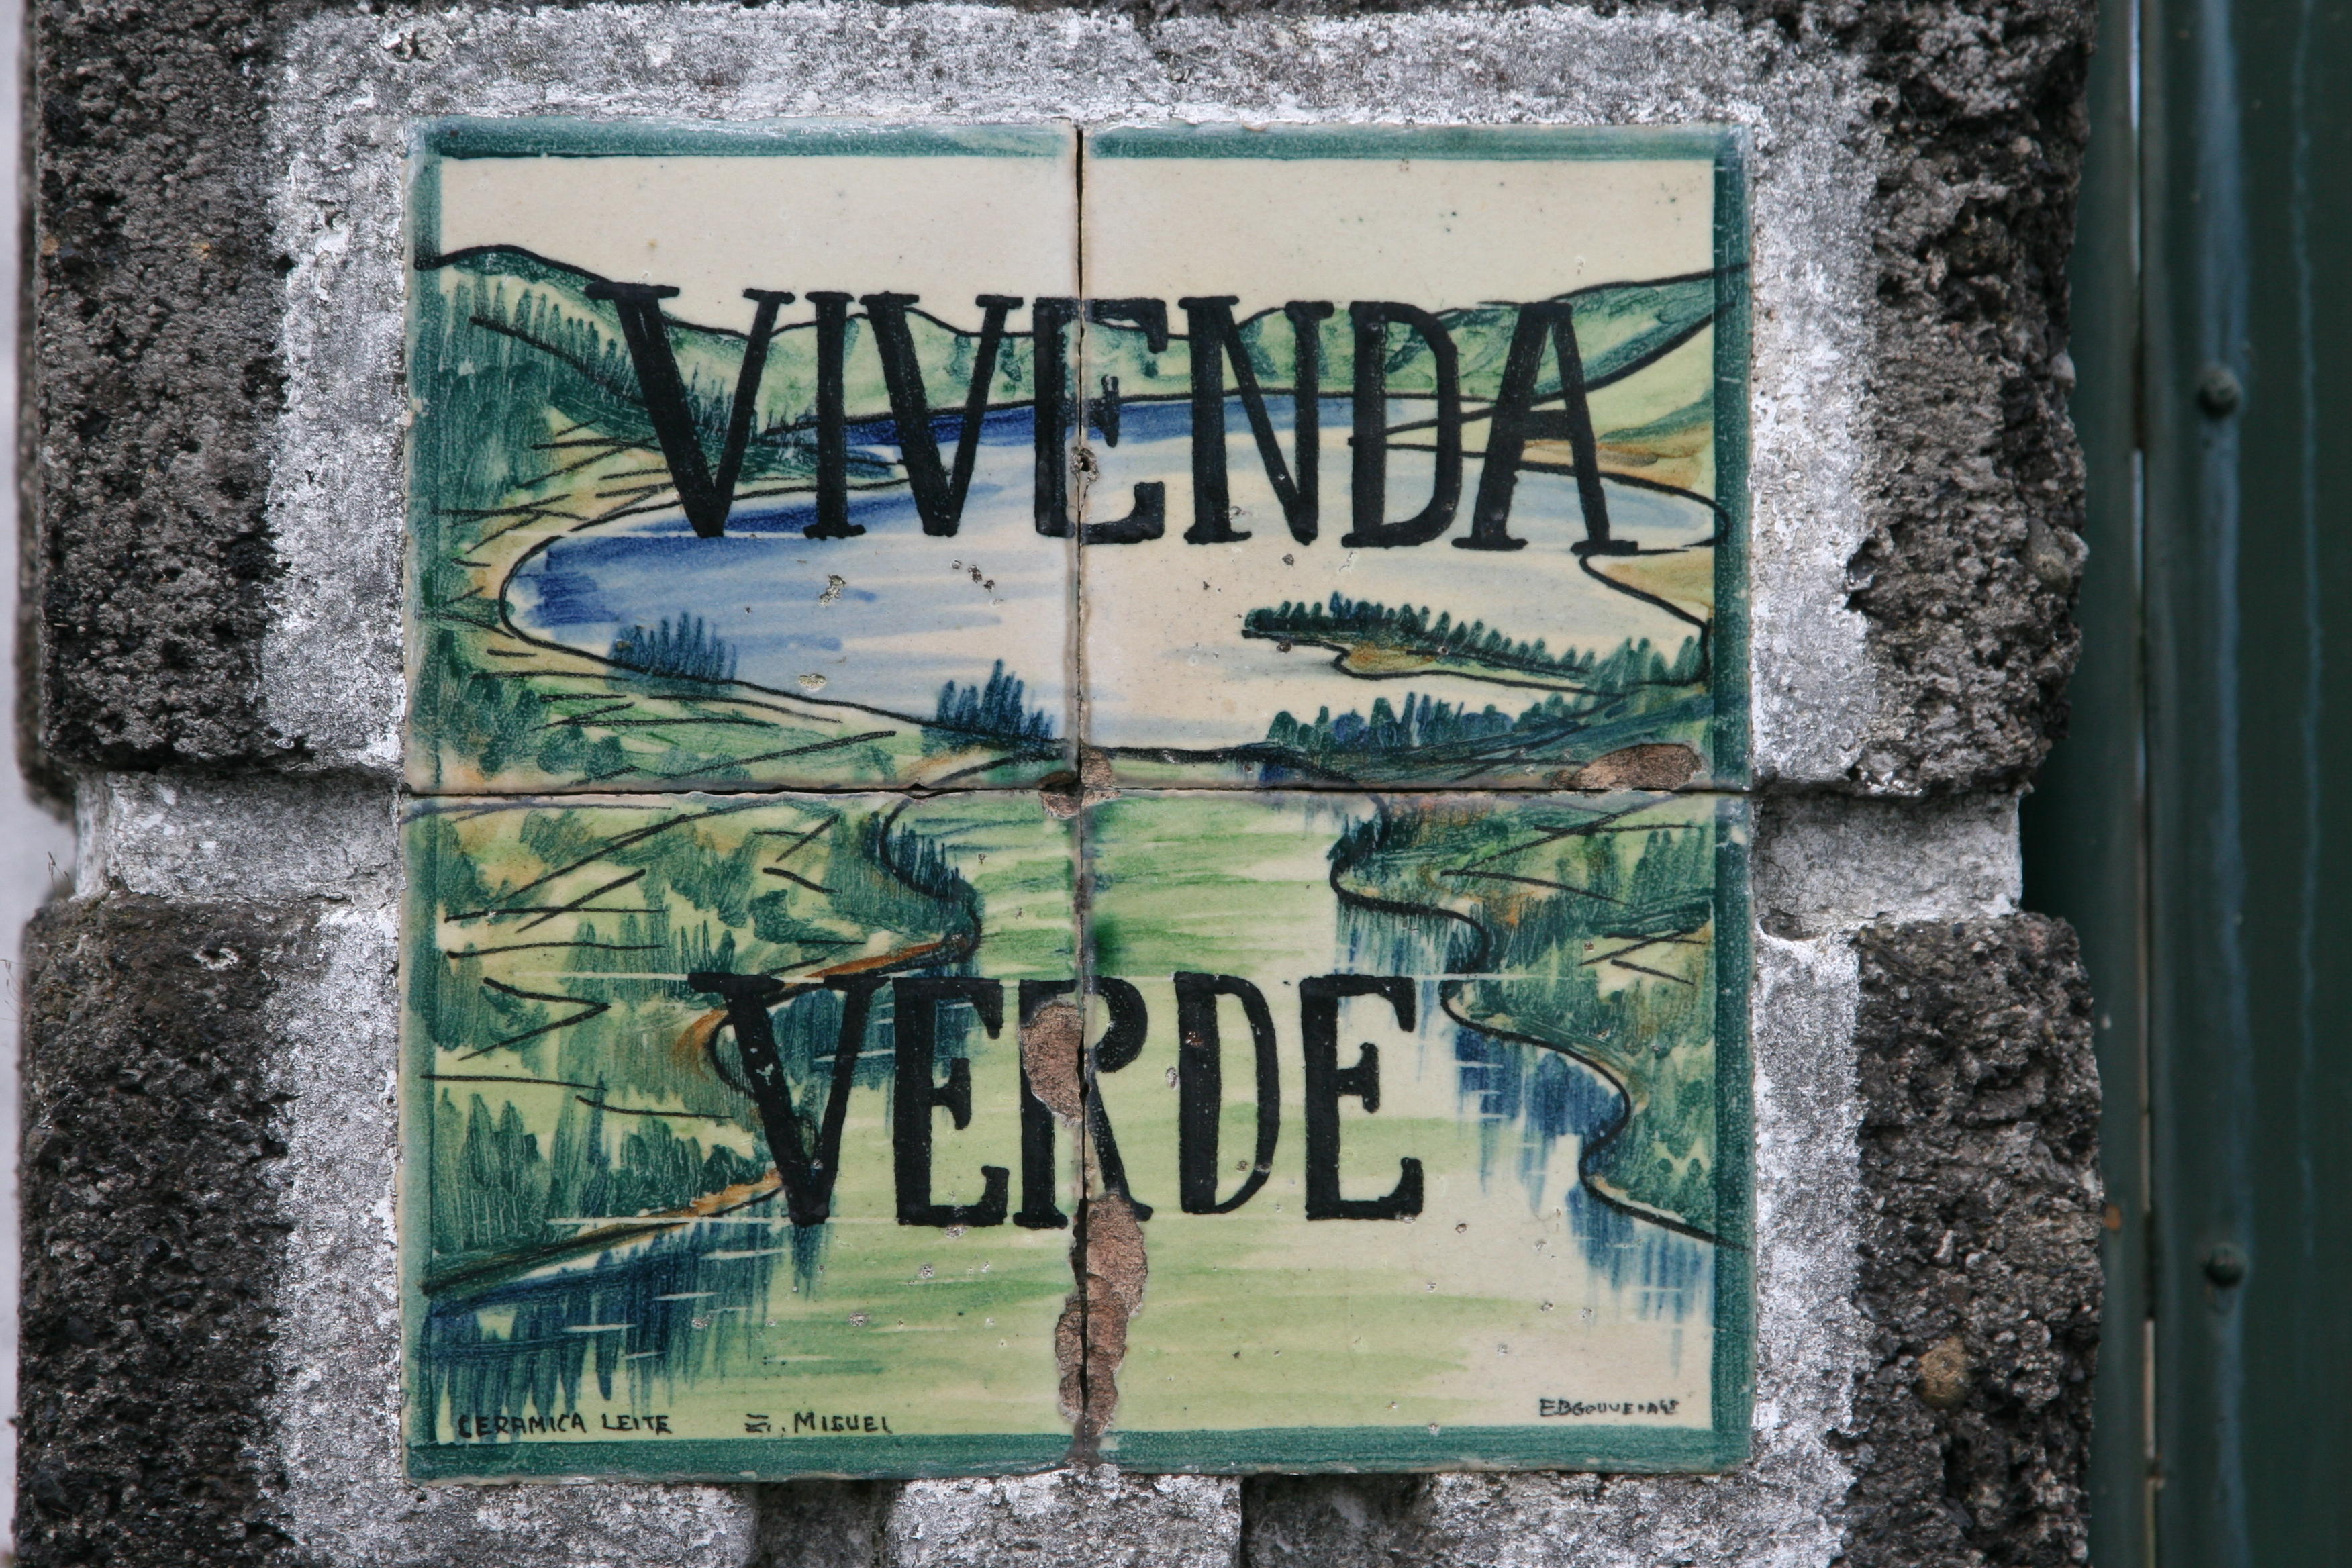 Verde means green in Portuguese